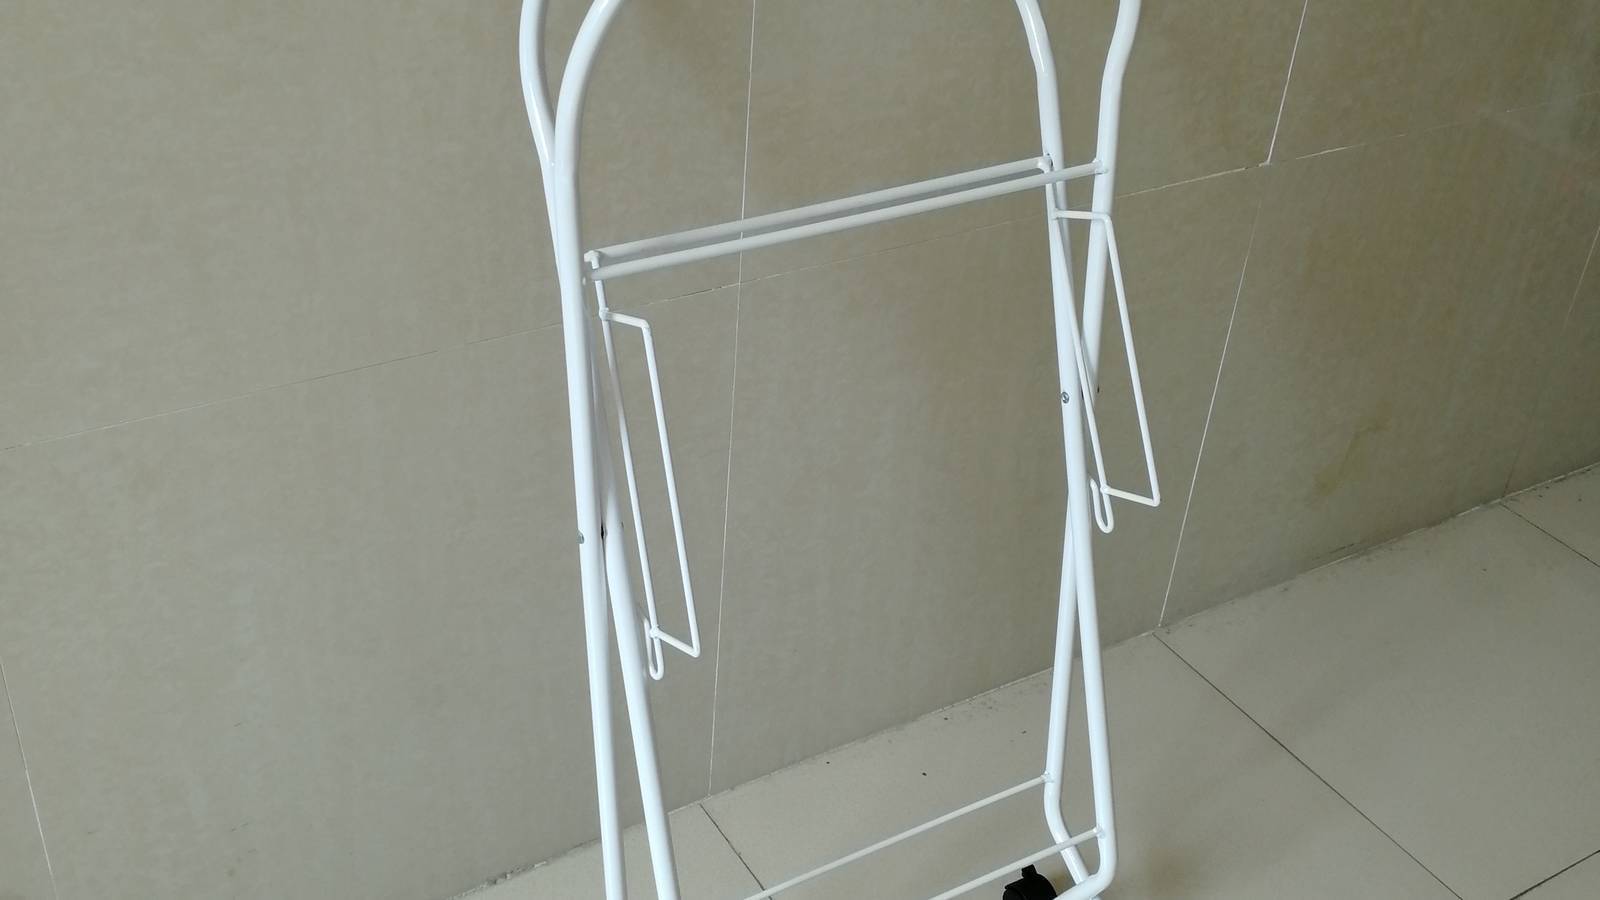 Aoqi professional baby bath and stand set supplier for bathroom